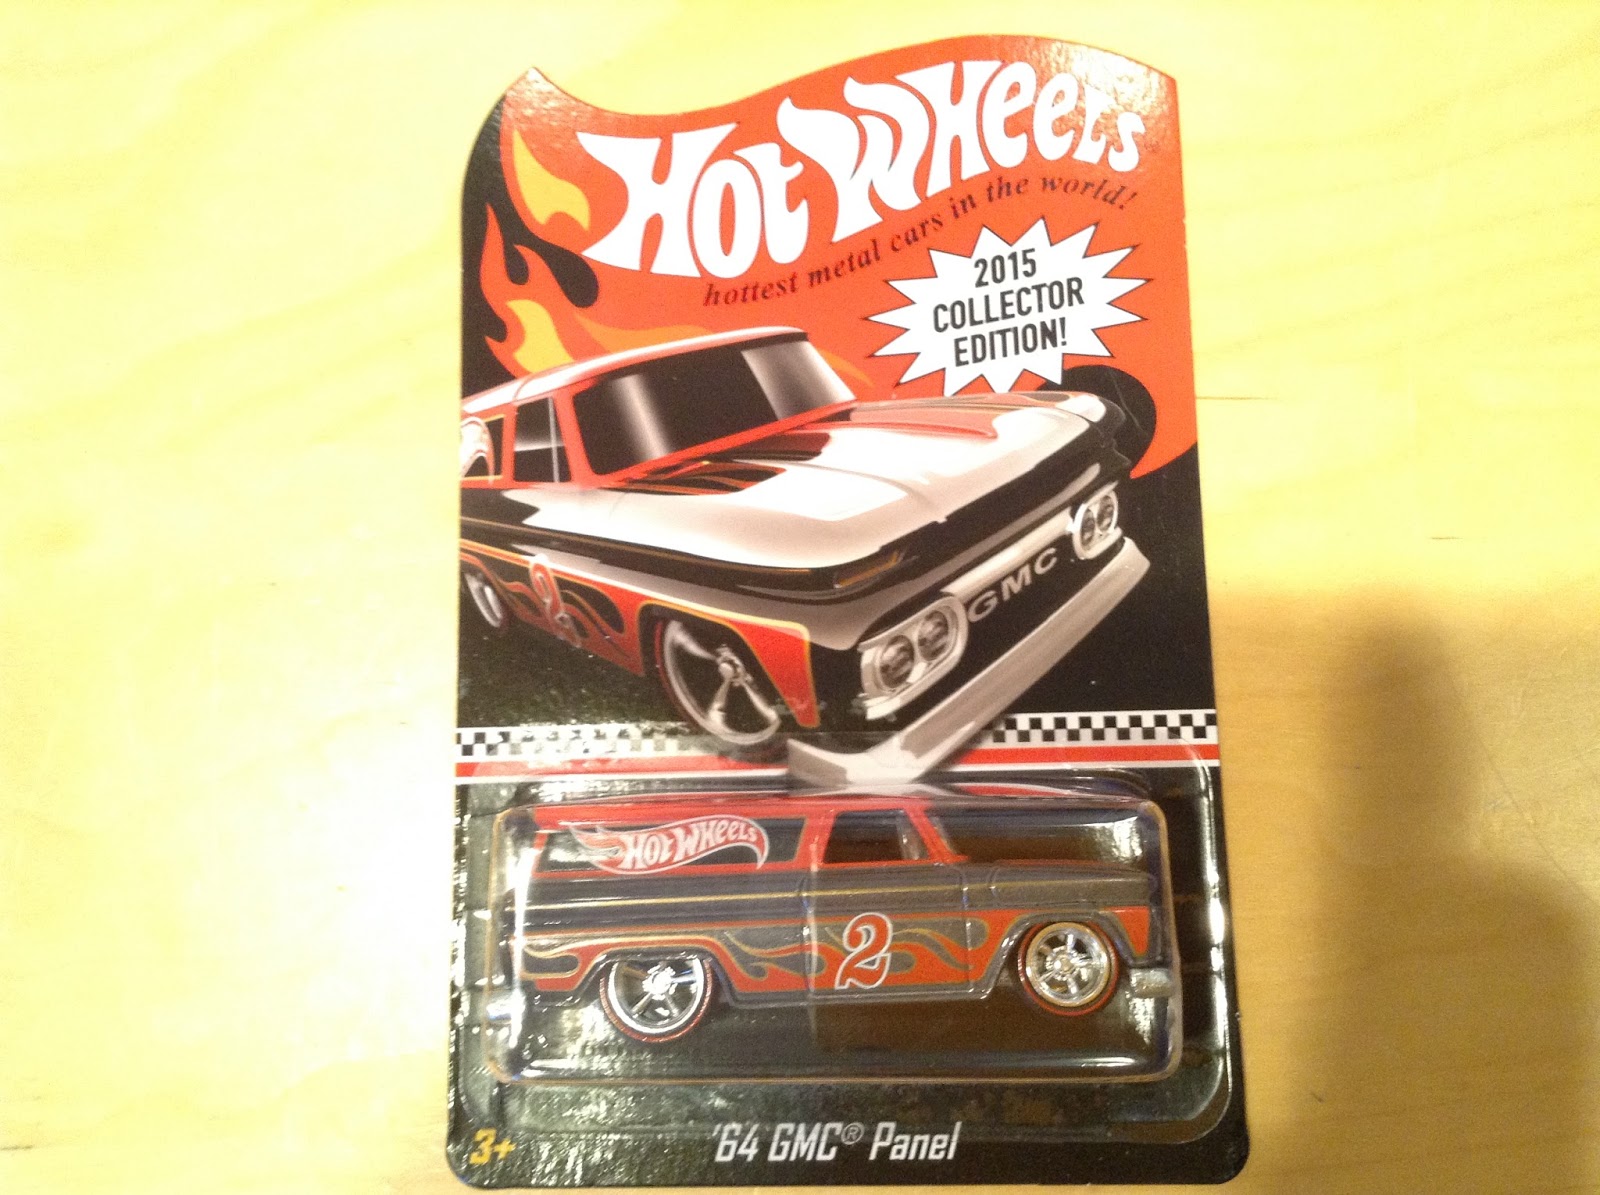 2015 Hot Wheels #2 Collector Edition '64 GMC Panel KMART mail-away